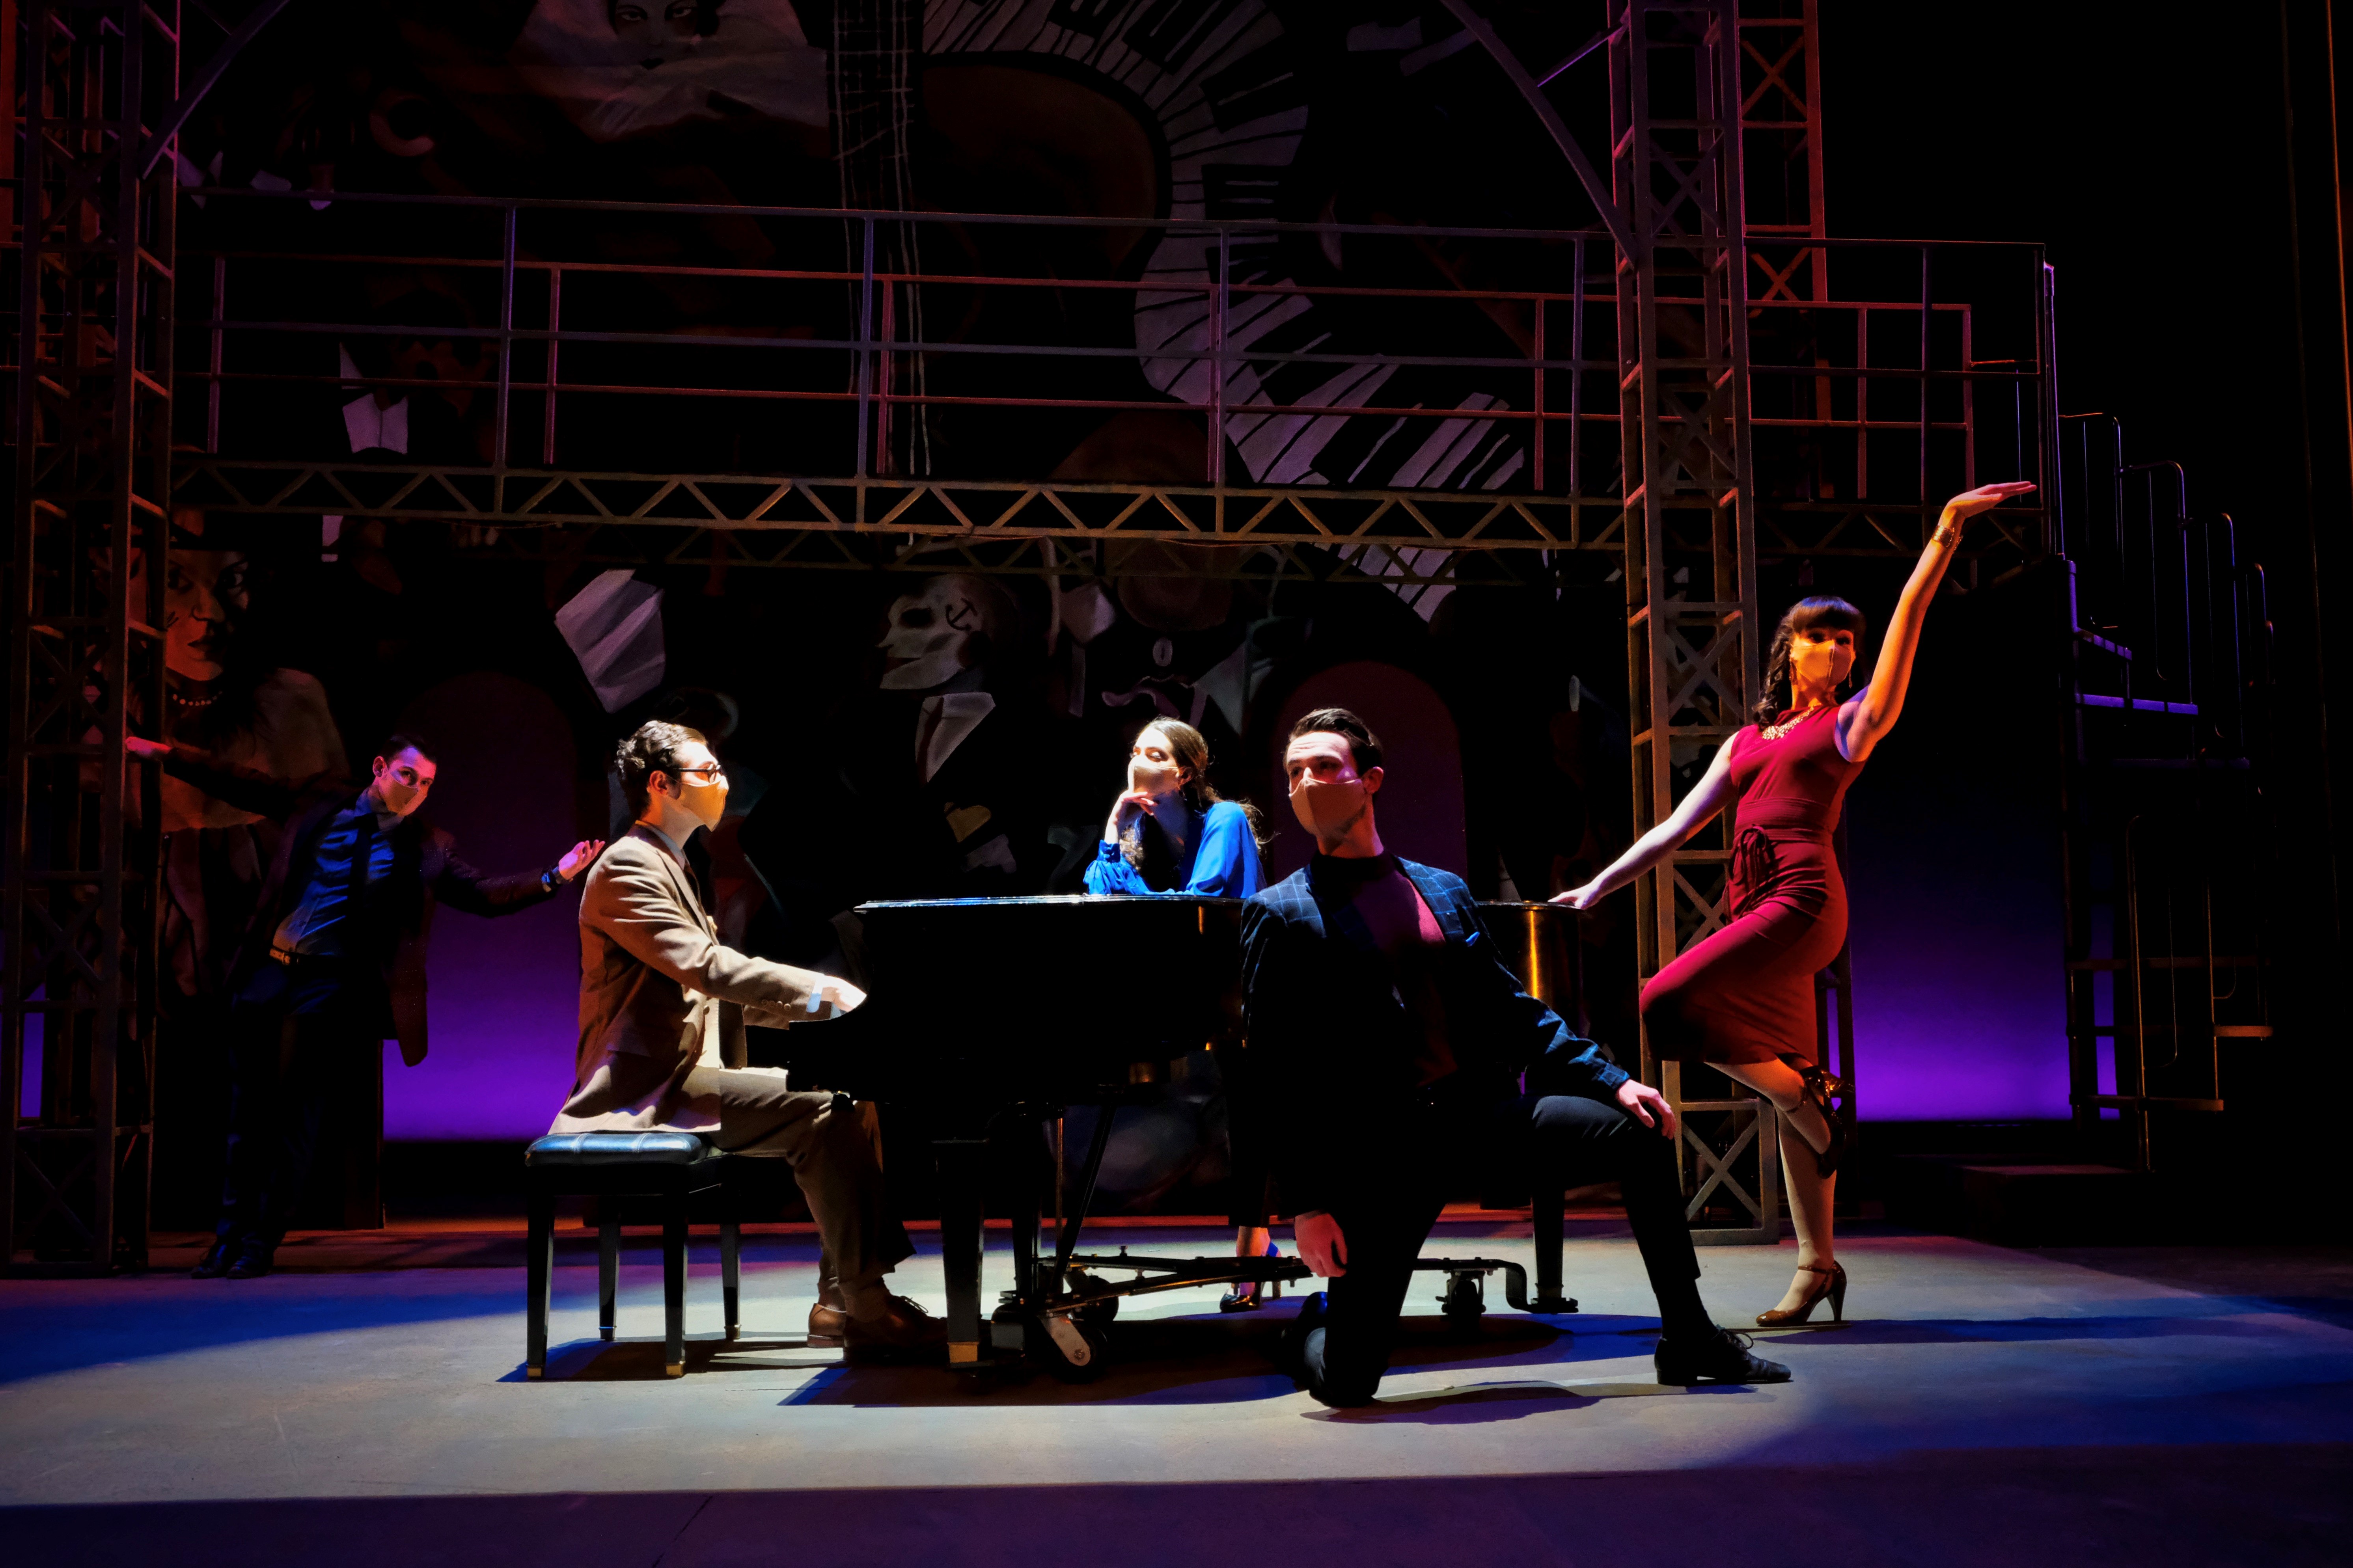 L-R: William Porter, Max Pinson (as Kurt Weill), Victoria Mesa, Ashton Lambert, and Kate Maniuszko in the Otterbein Departments of Theatre & Dance and Music production of “Into a Lamplit Room: the Songs of Kurt Weill.”
Photo By: Mark Mineart
